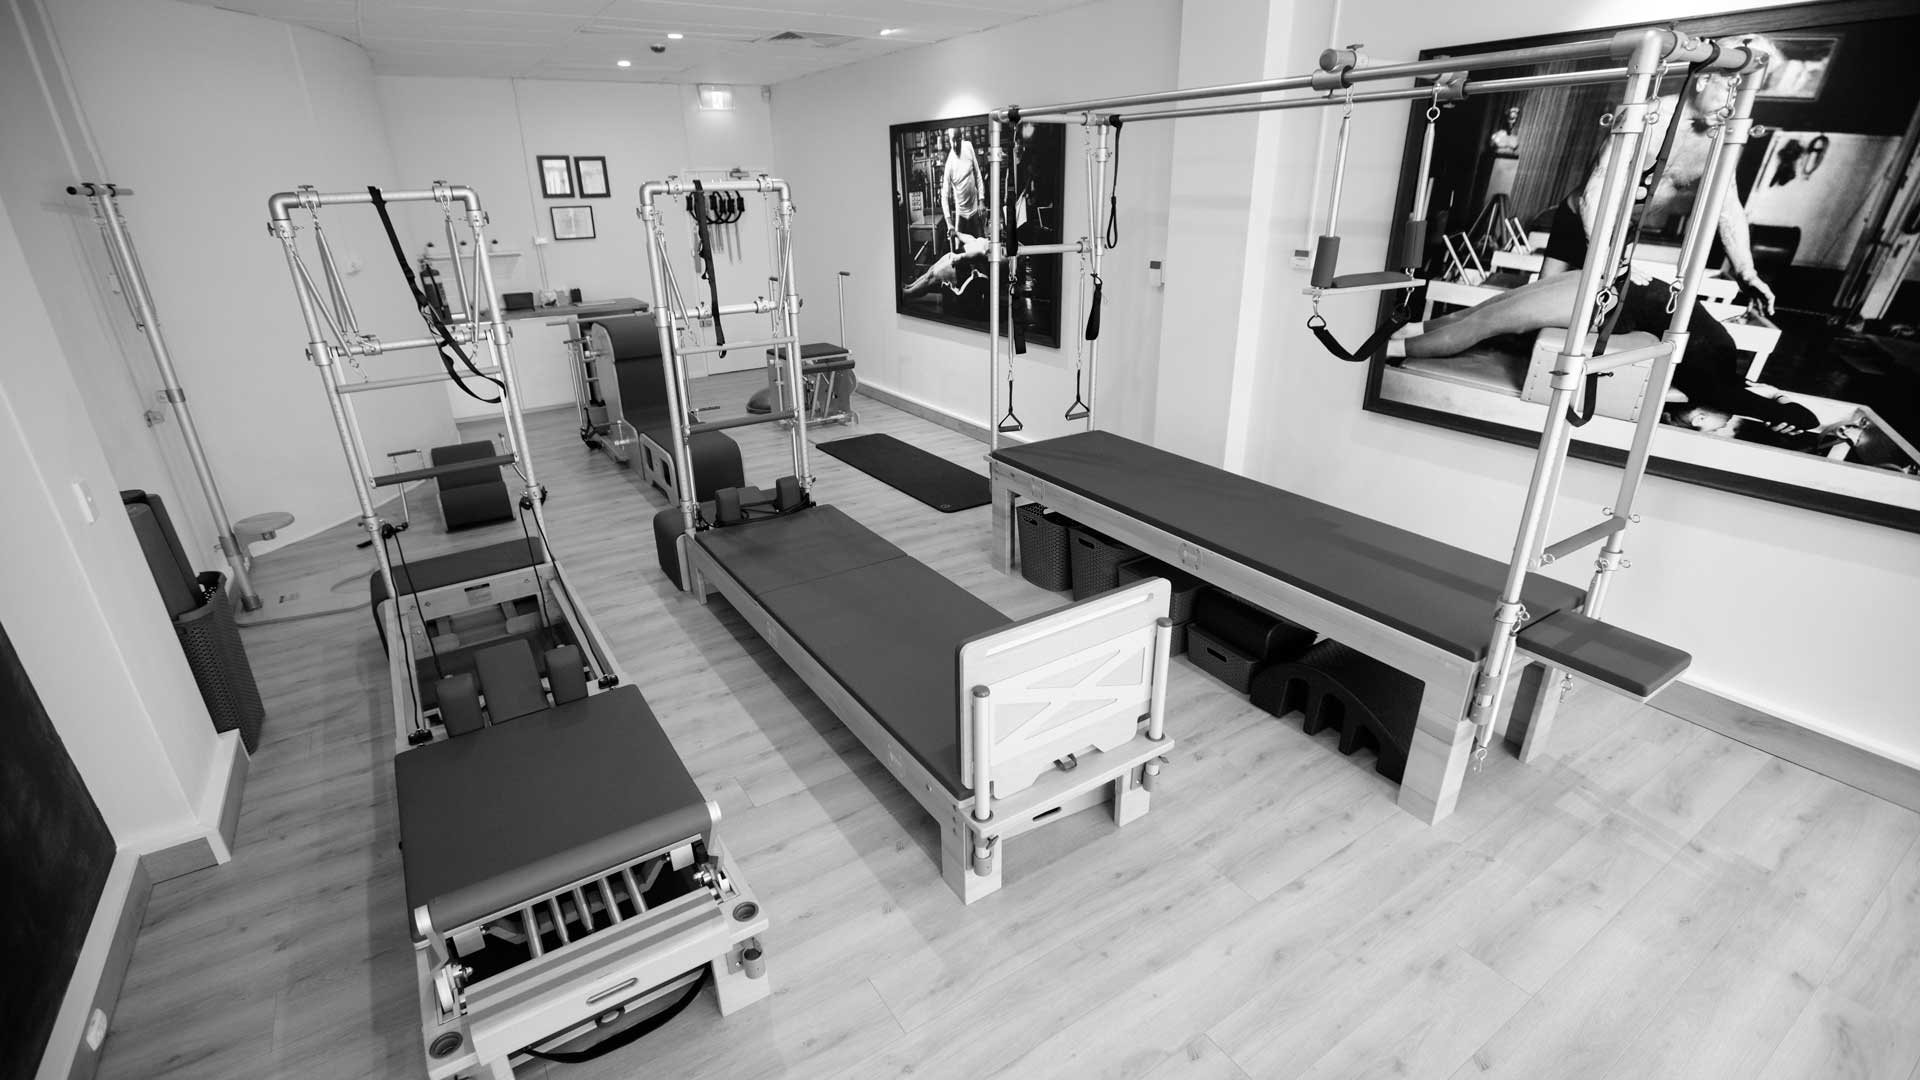 Pilateswise studio in Manly on Sydney's Northern Beaches